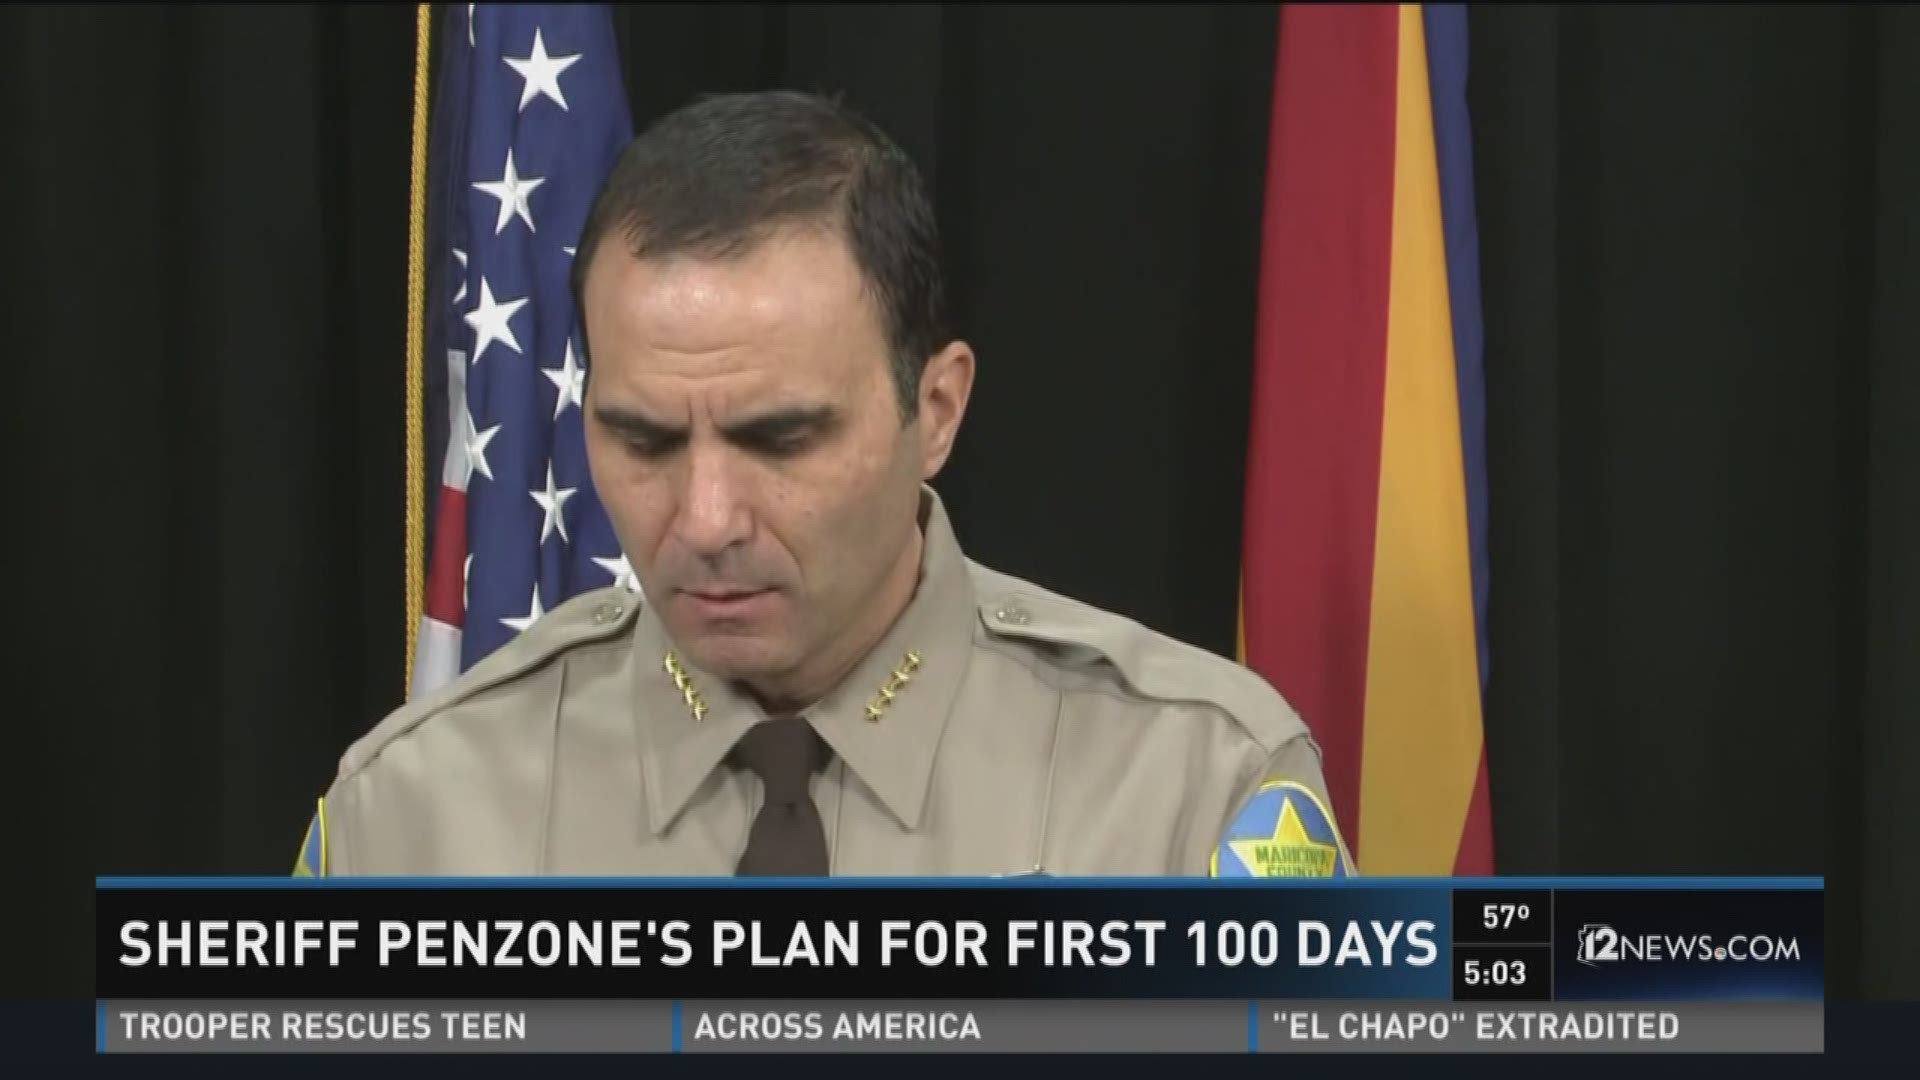 Penzone plans to assess several portions of the Maricopa County Sheriff's Office in his first 100 days as sheriff.